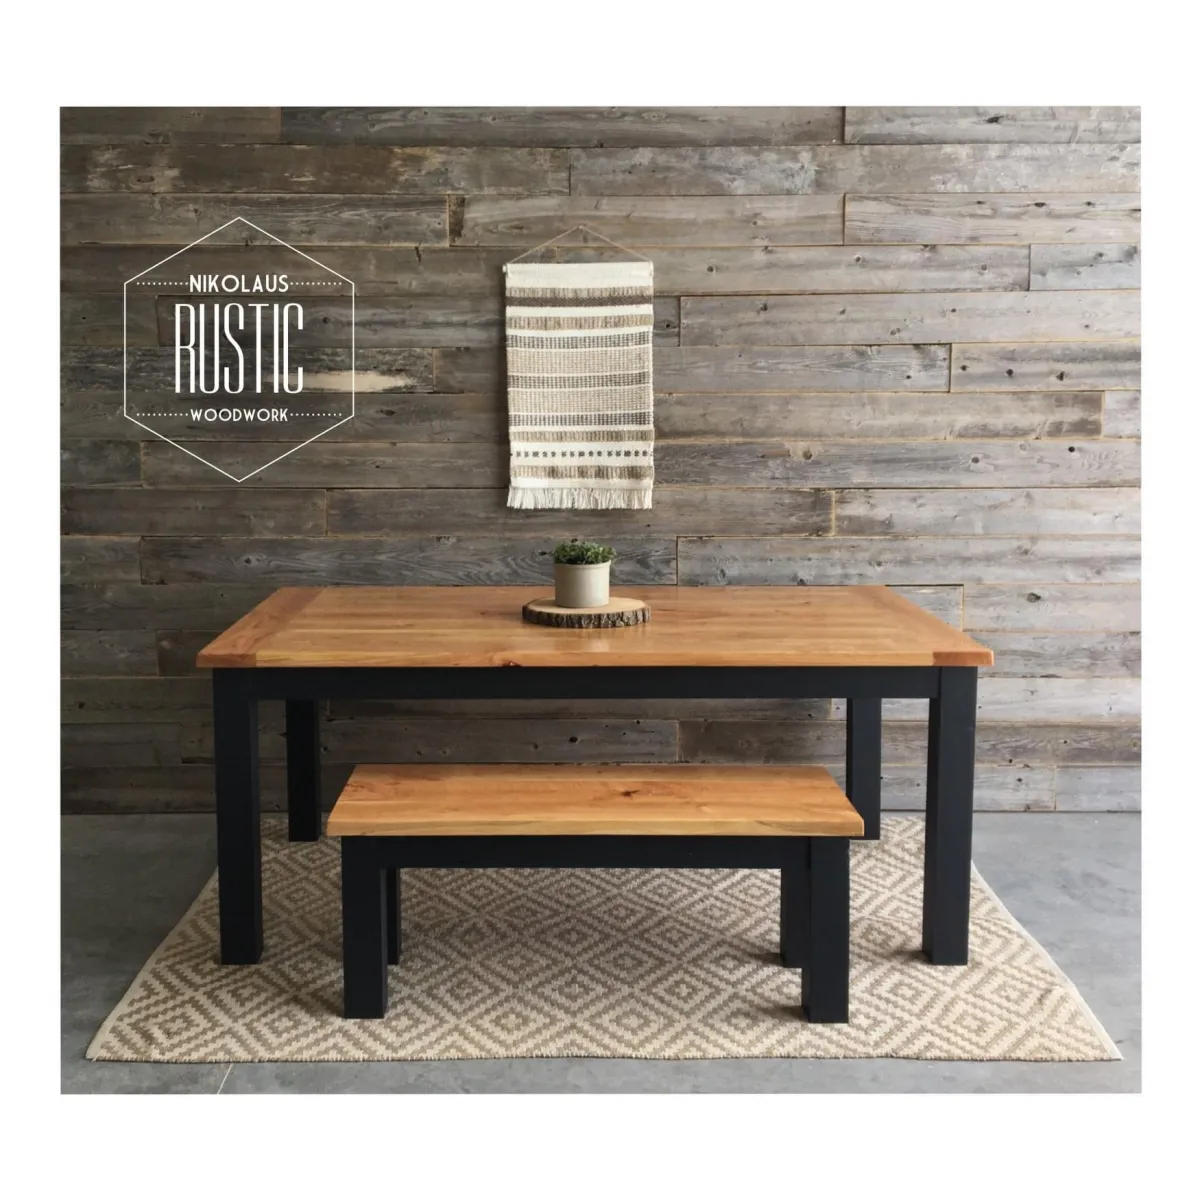 Nikolaus Rustic Woodwork custom modern farmhouse dining table with black legs and bench